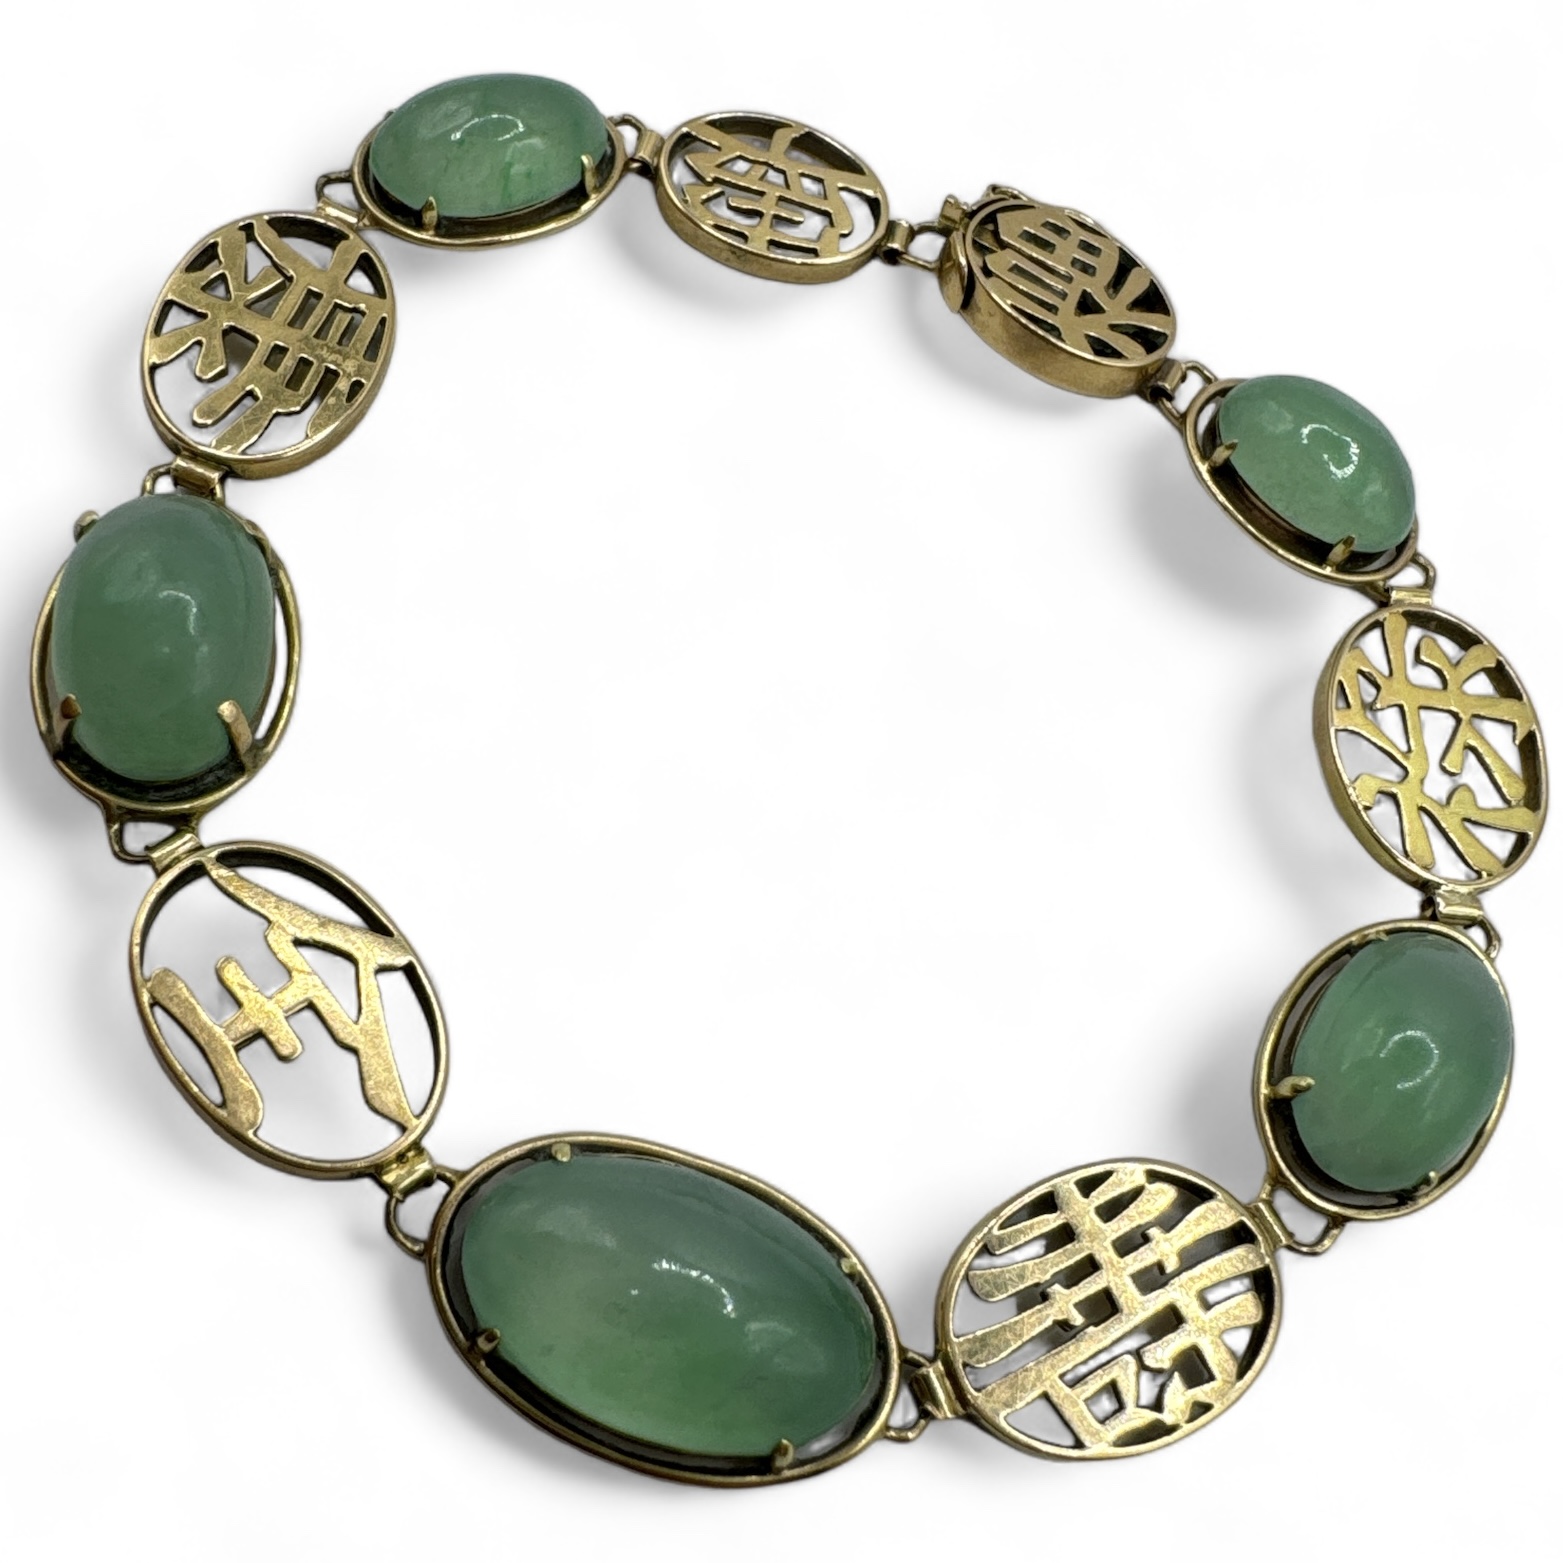 A translucent green jadeite set bracelet, featuring Chinese characters. Stamped "14k" and testing